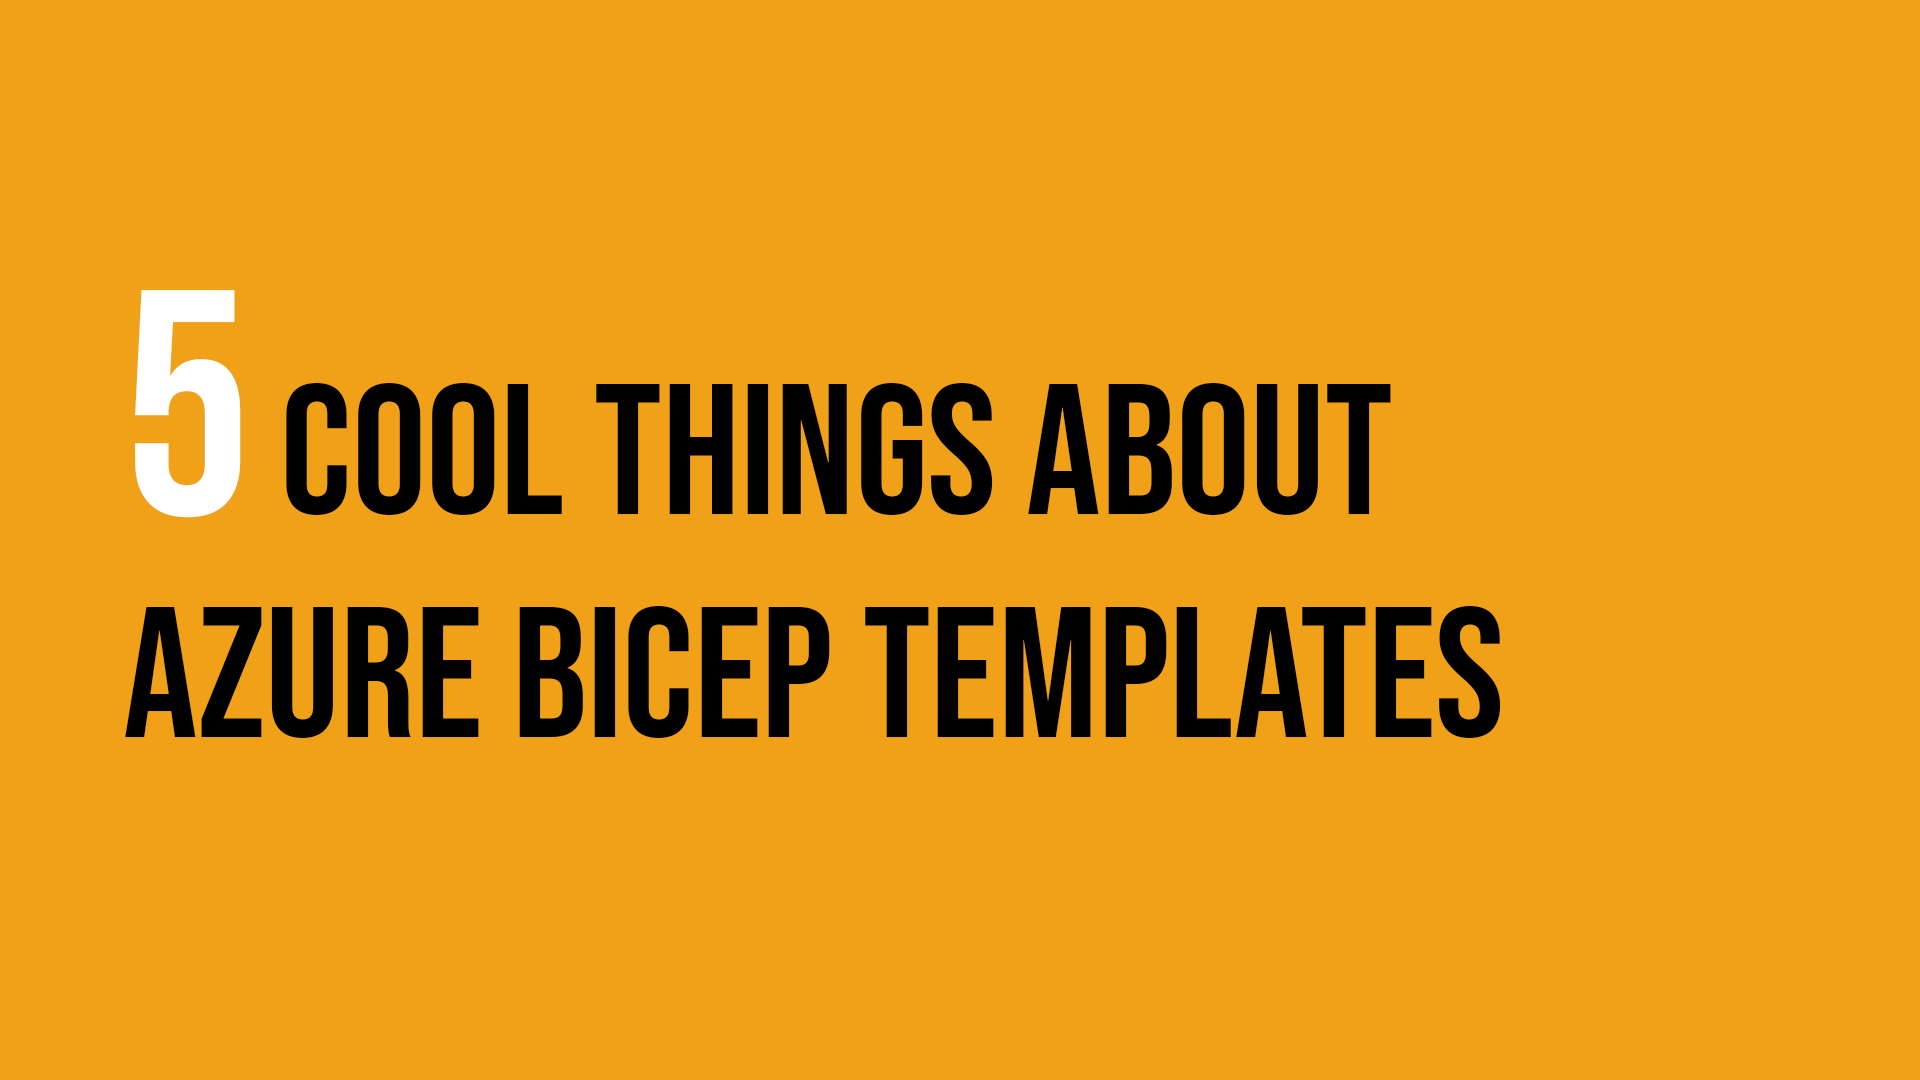 5 Cool Things About Azure Bicep Templates